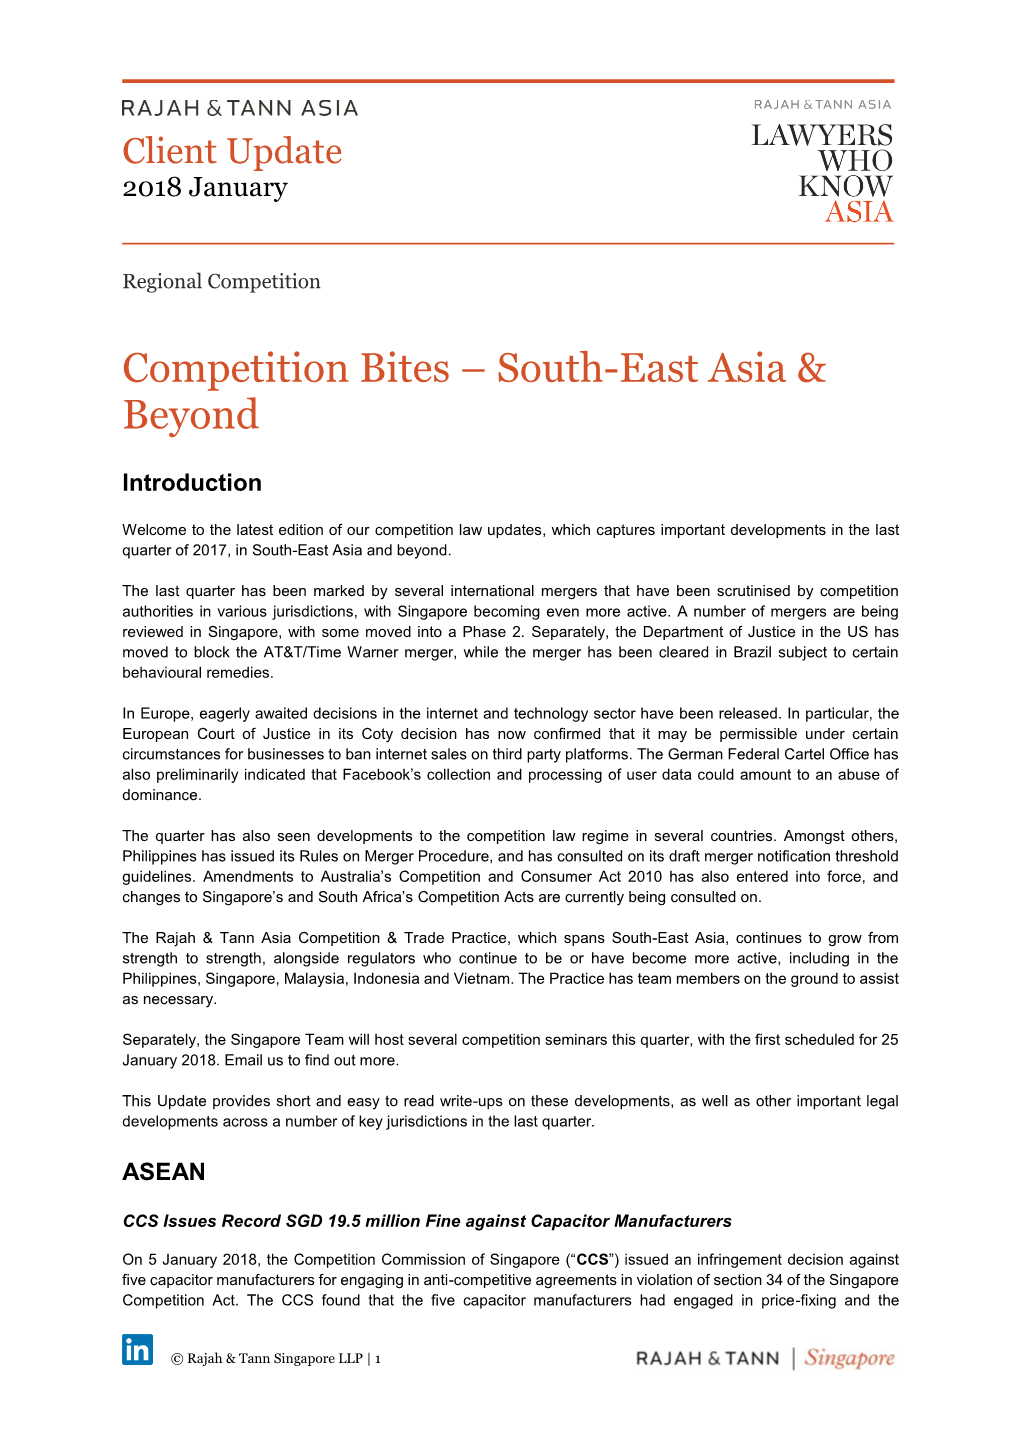 Competition Bites – South-East Asia & Beyond